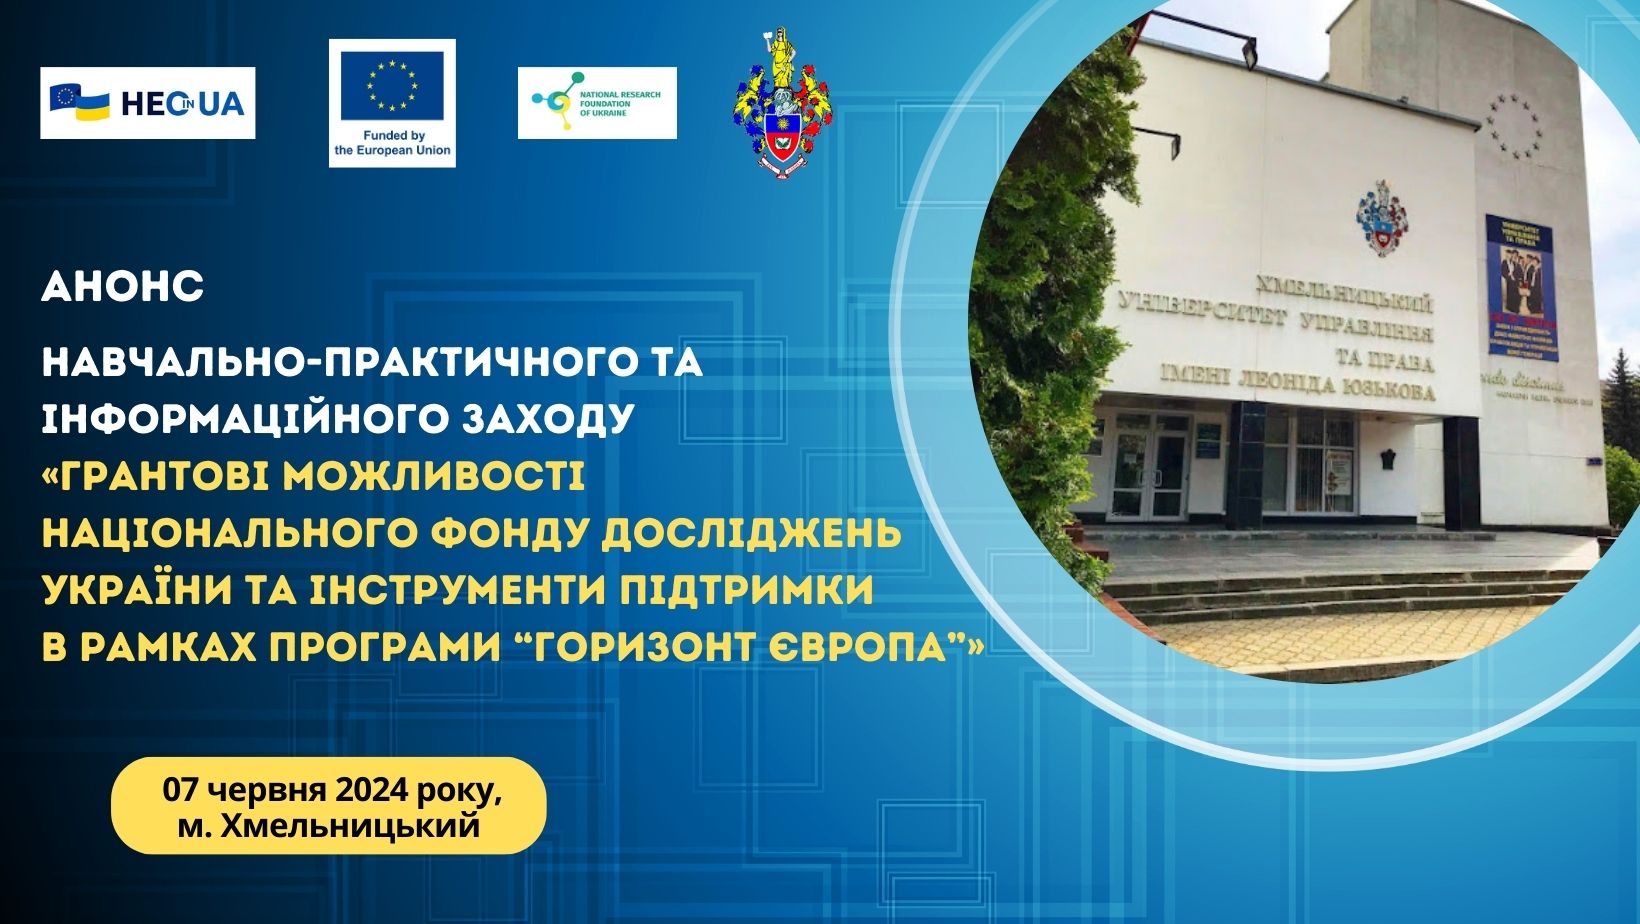 Grant opportunities of the NRFU and support instruments within the Horizon Europe Programme: info event in Khmelnytskyi